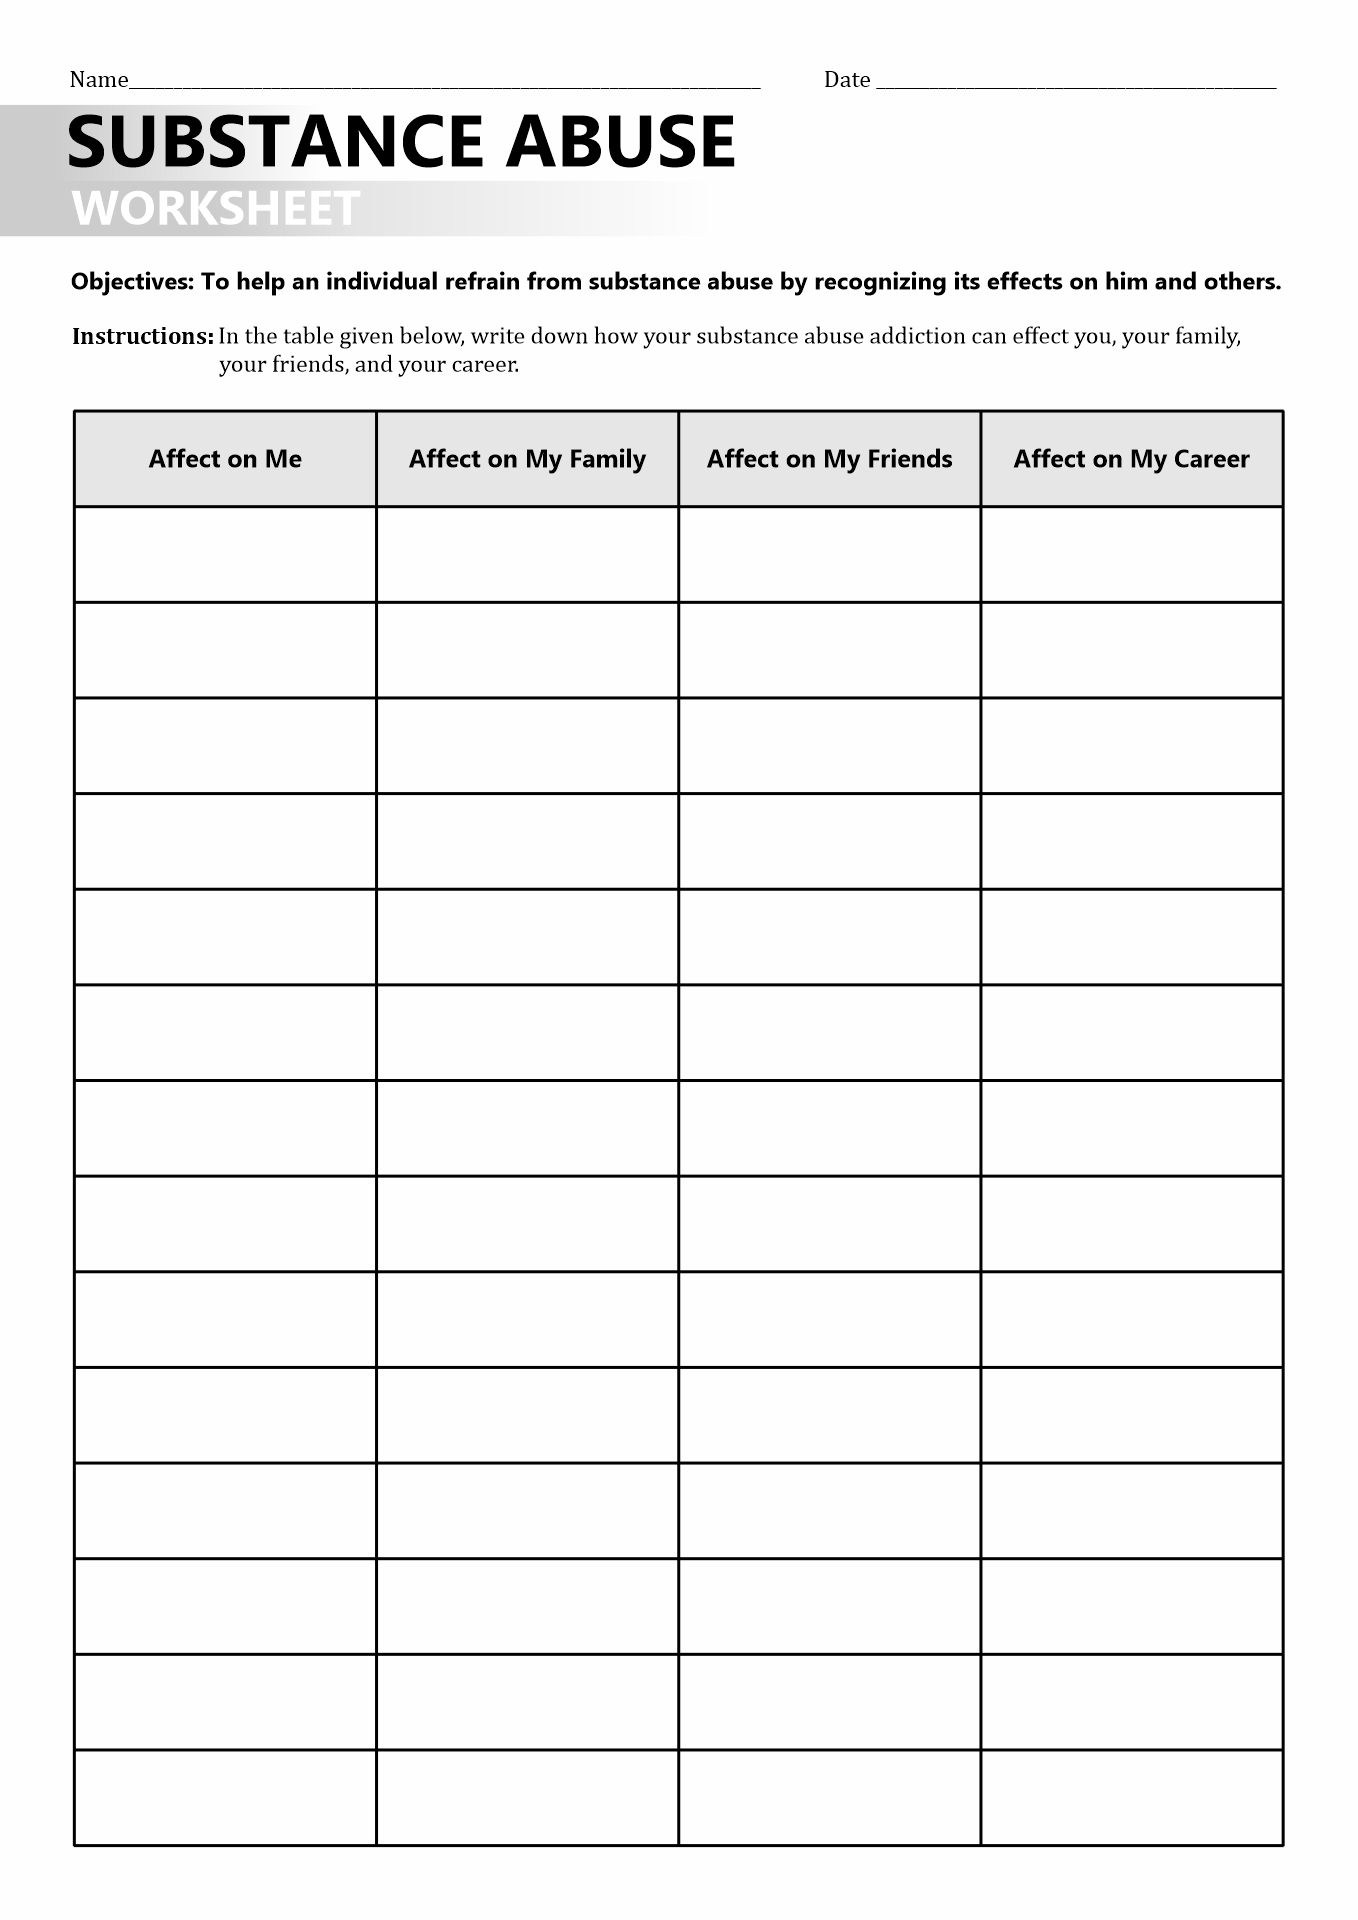 wellness-recovery-action-plan-worksheet